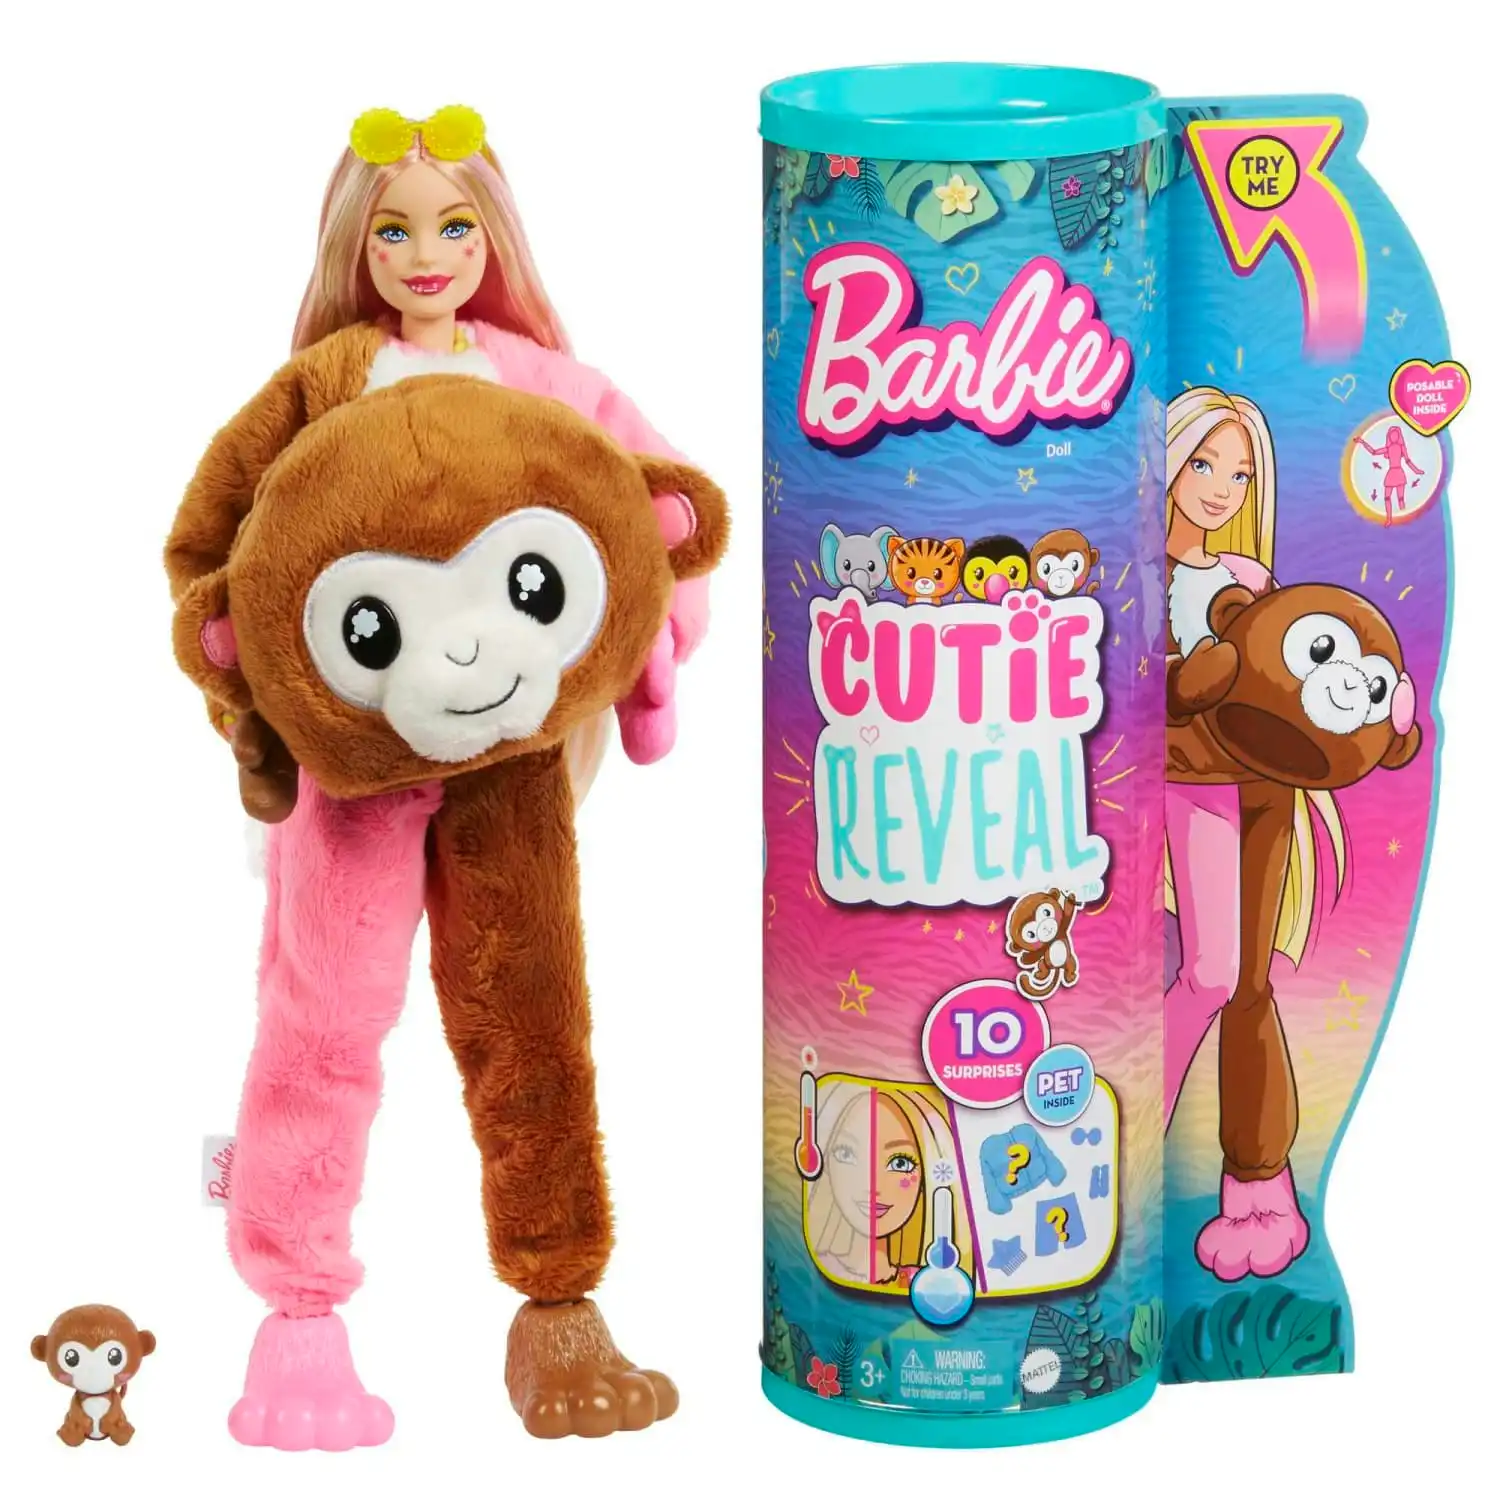 Barbie Cutie Reveal Chelsea Doll And Accessories Jungle Series Monkey-themed Small Doll Set